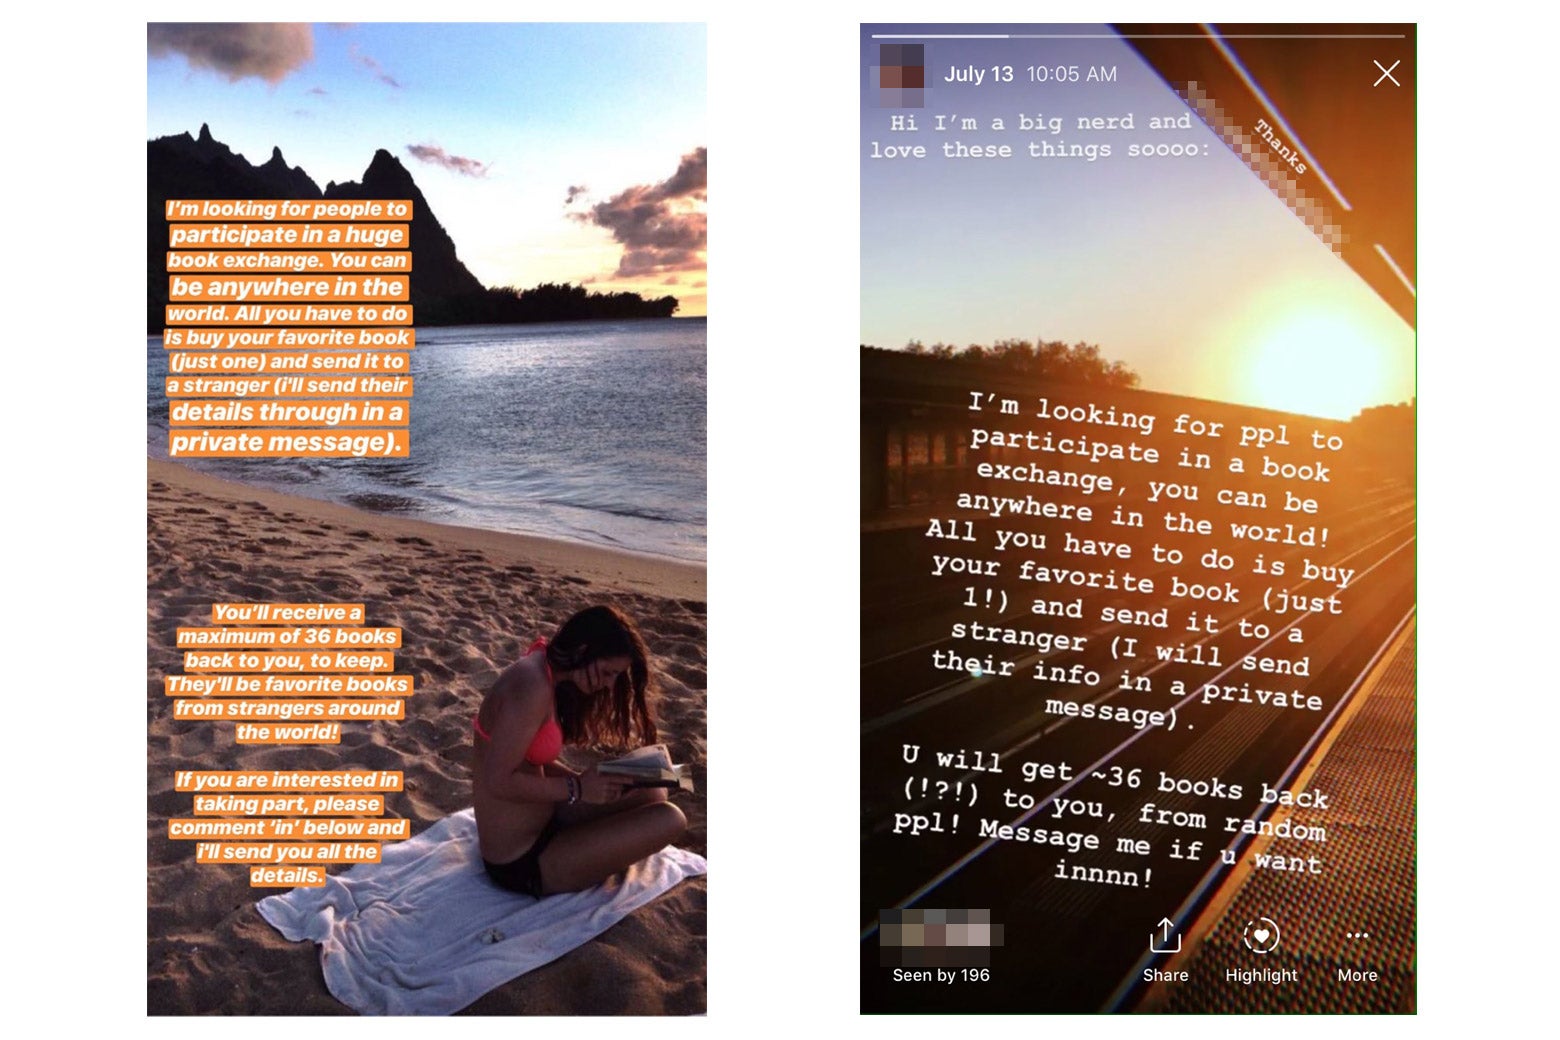 Two Instagram Stories screenshots about the book-sending challenge.